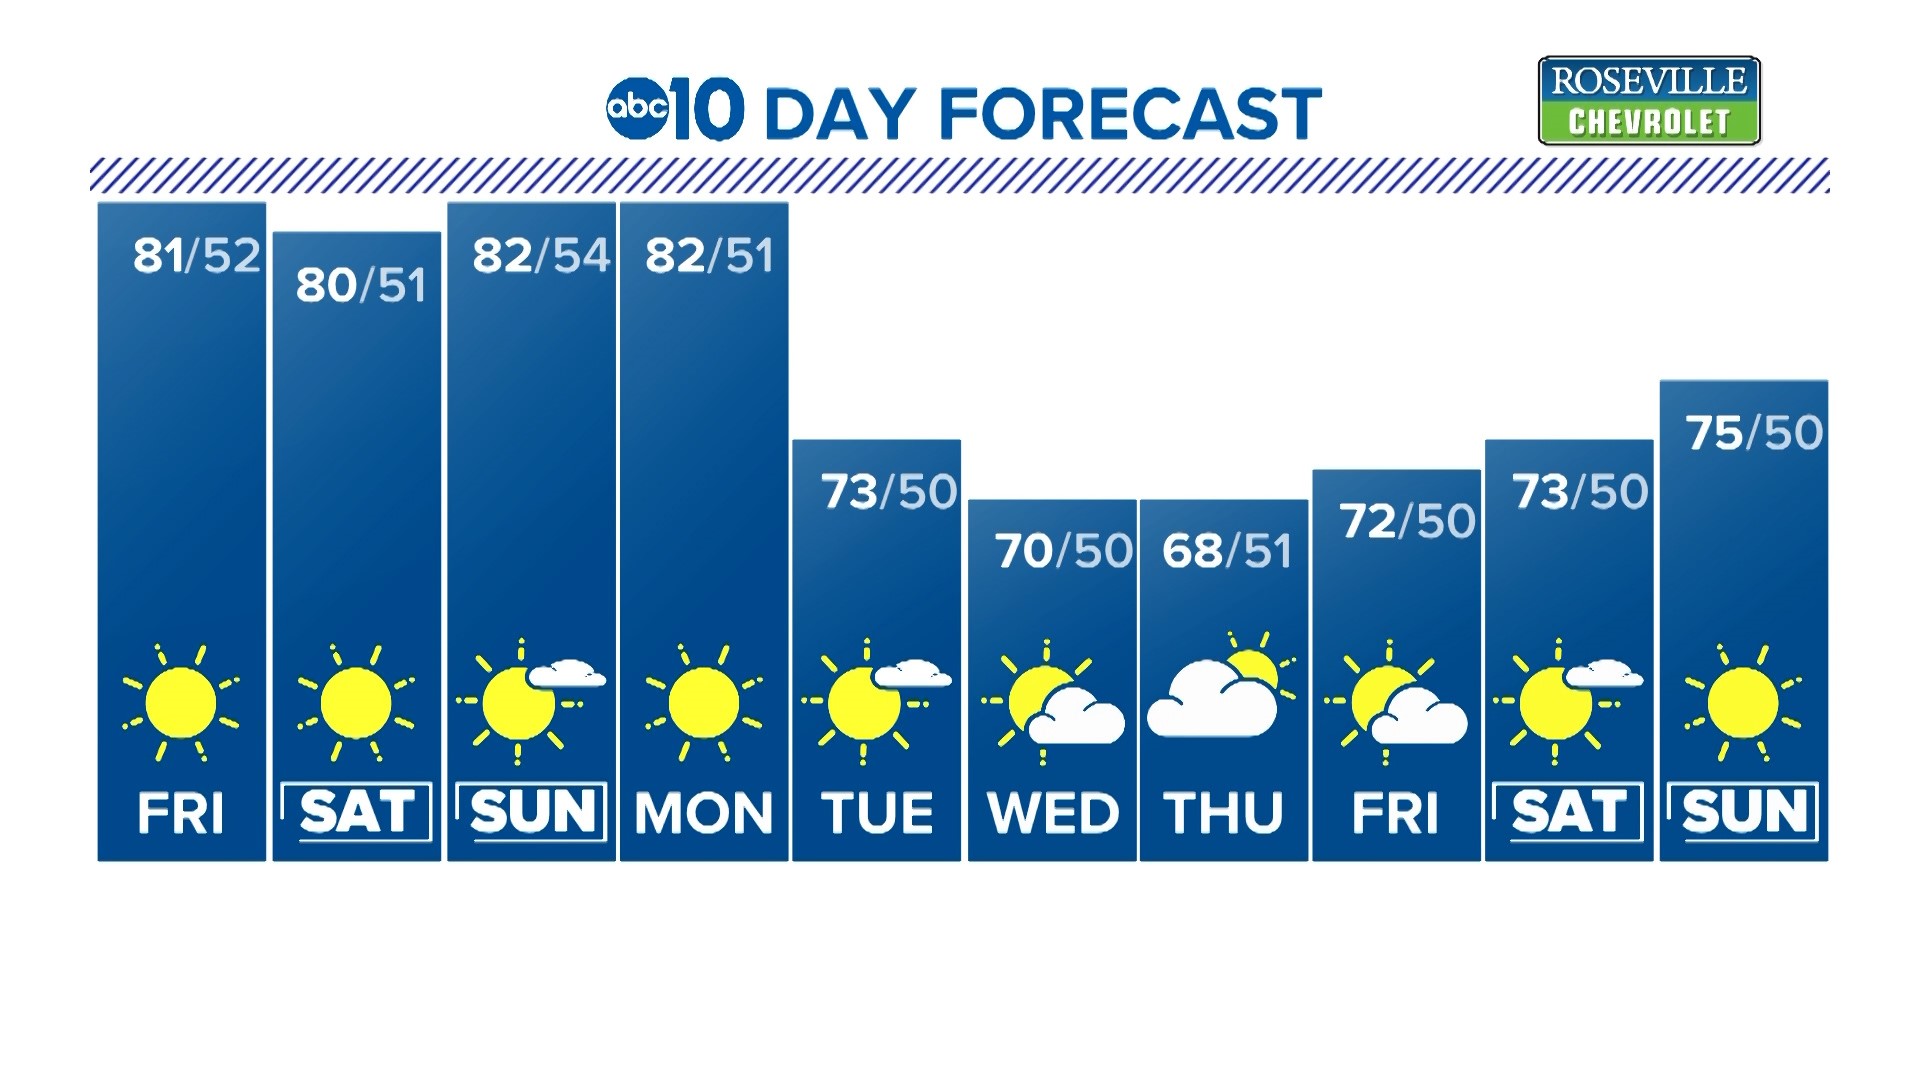 ABC10's Brenden Mincheff gives us a look at our 10-day forecast.